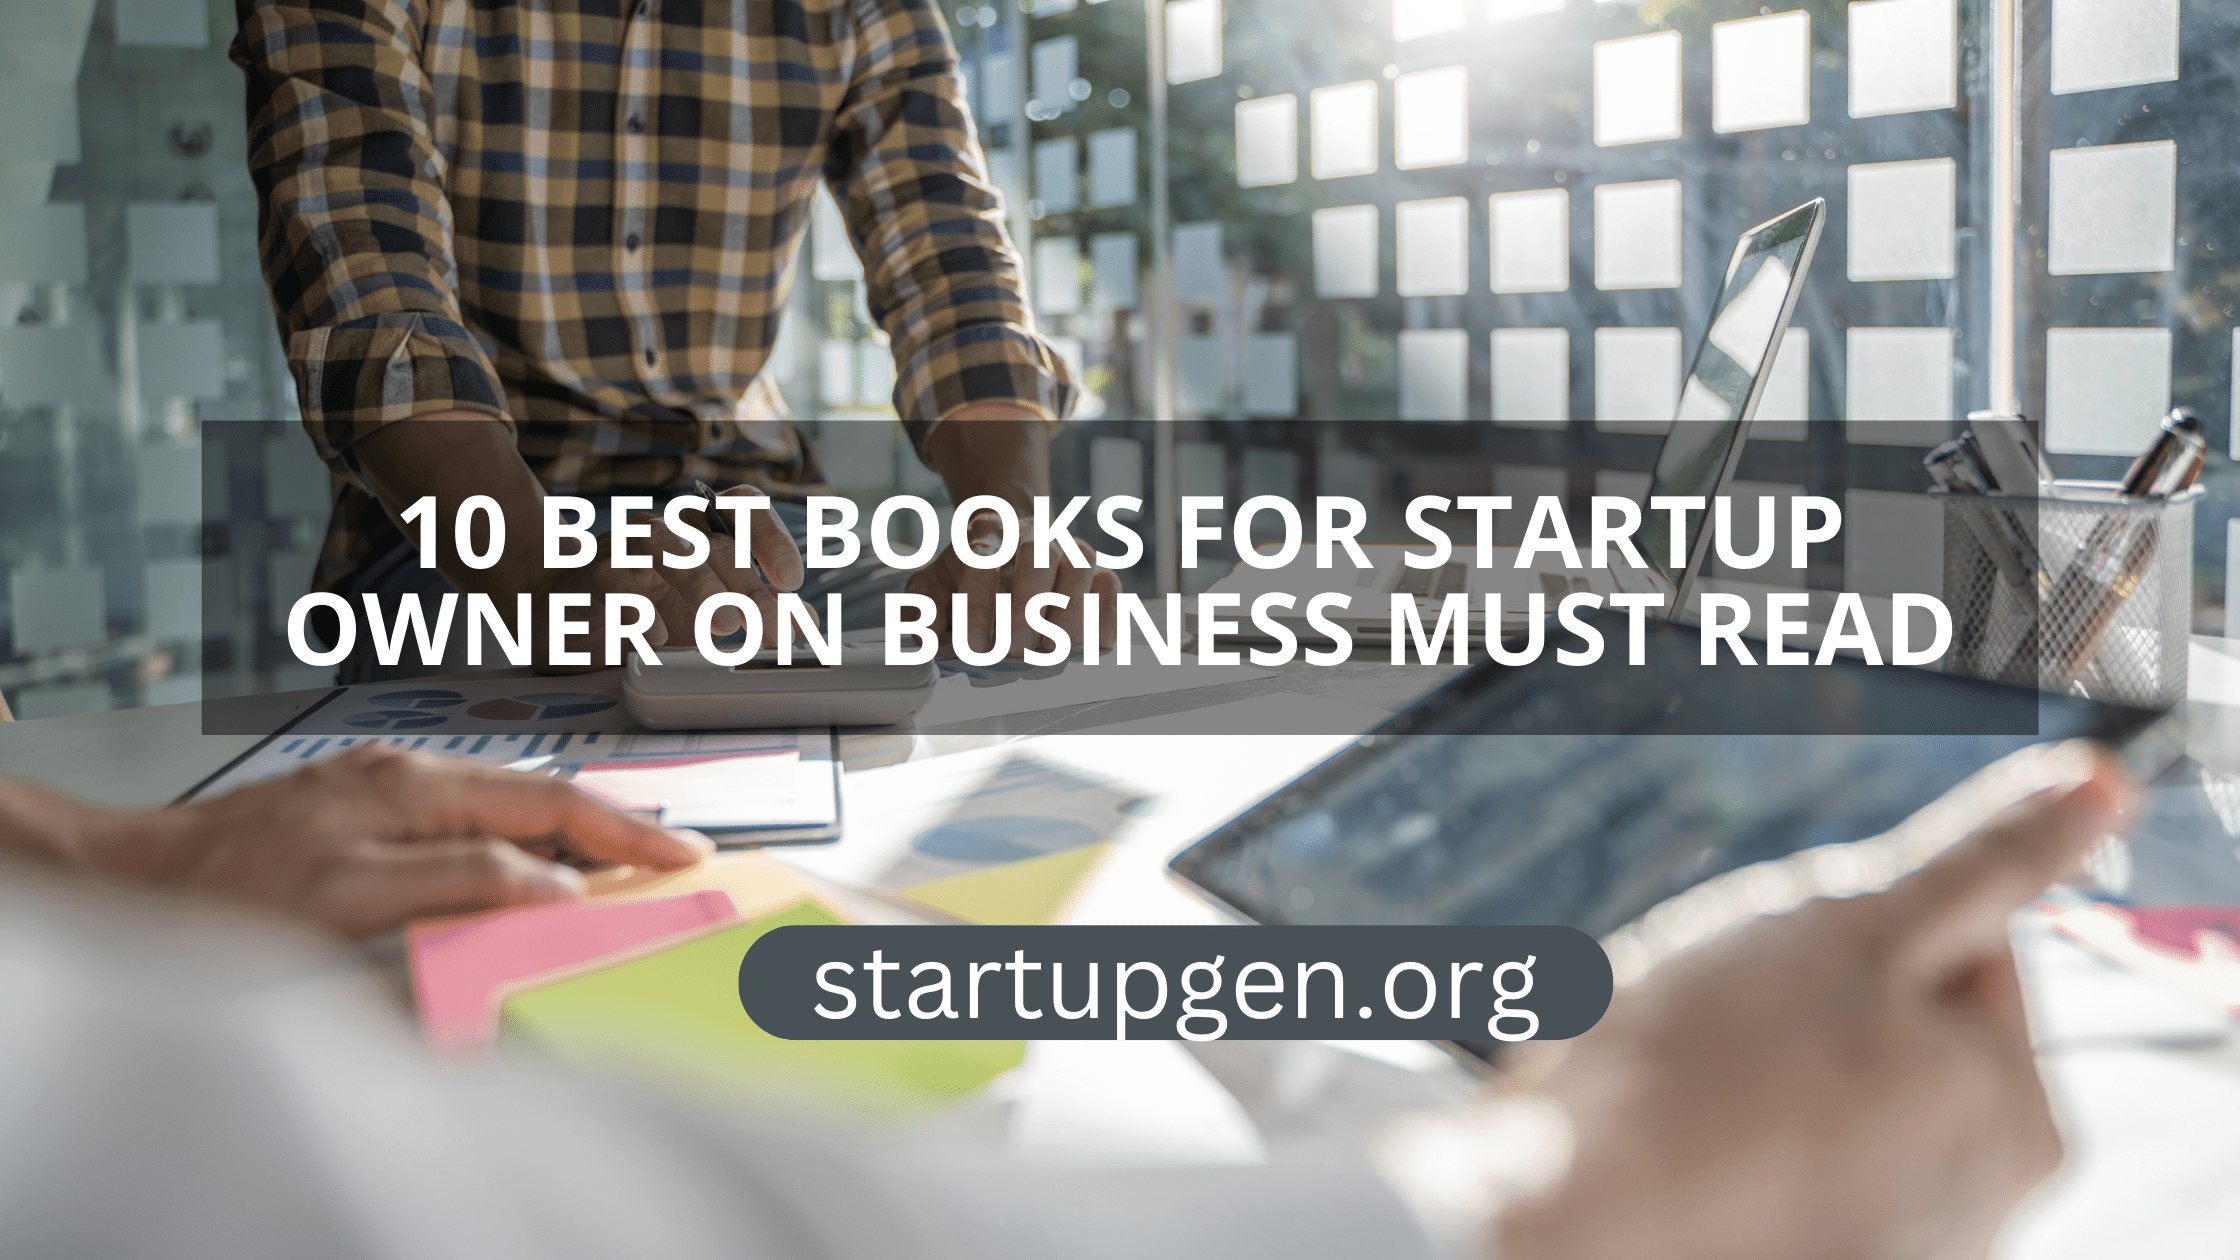 10 Best Books For Startup Owner On Business Must Read